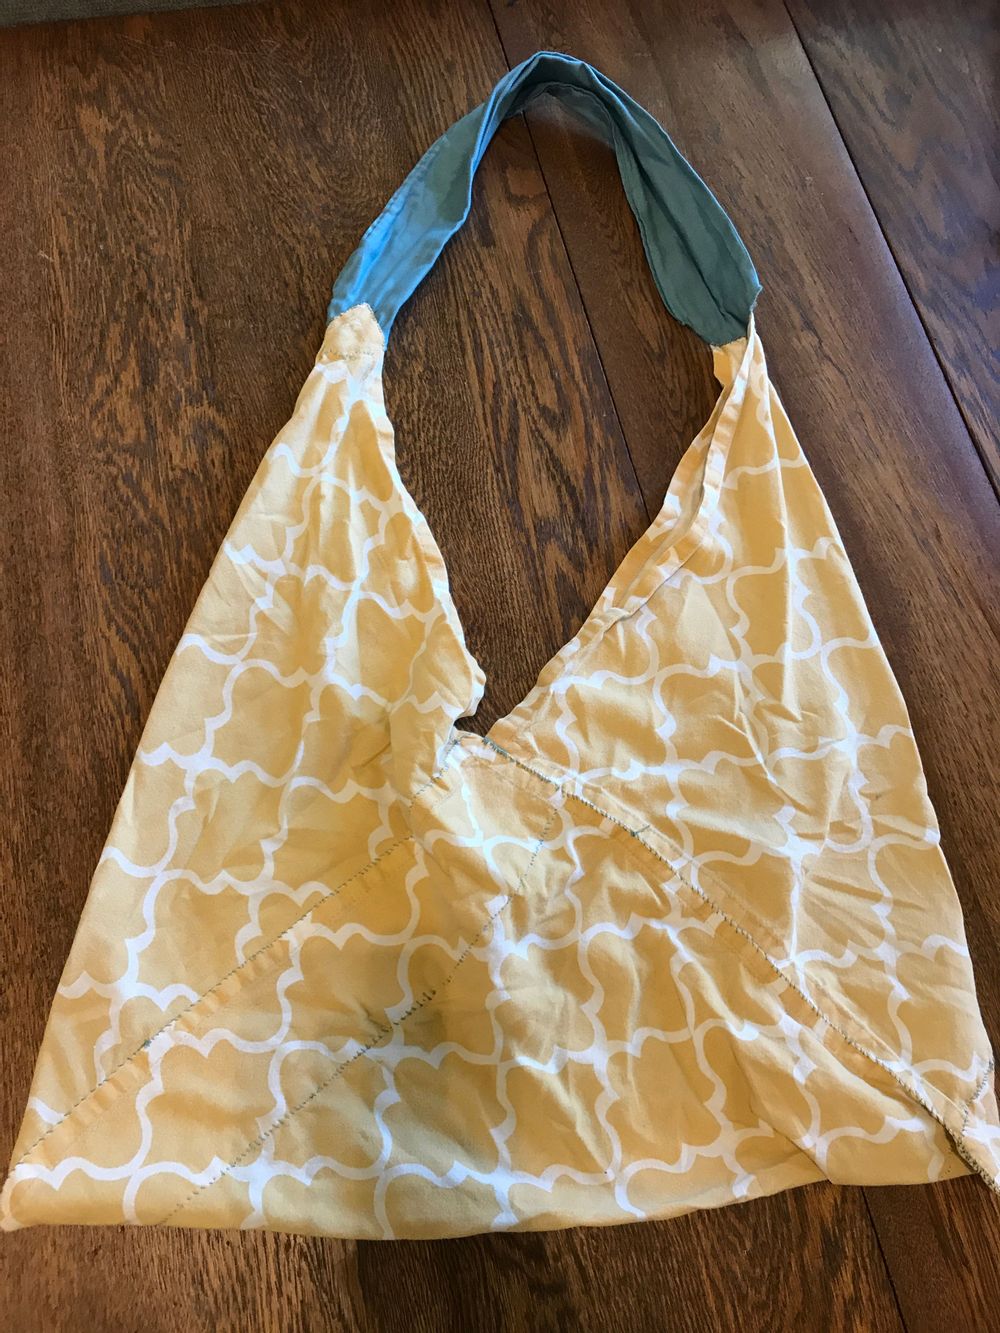 A yellow and white cloth shoulder bag with a teal shoulder strap on an oak table